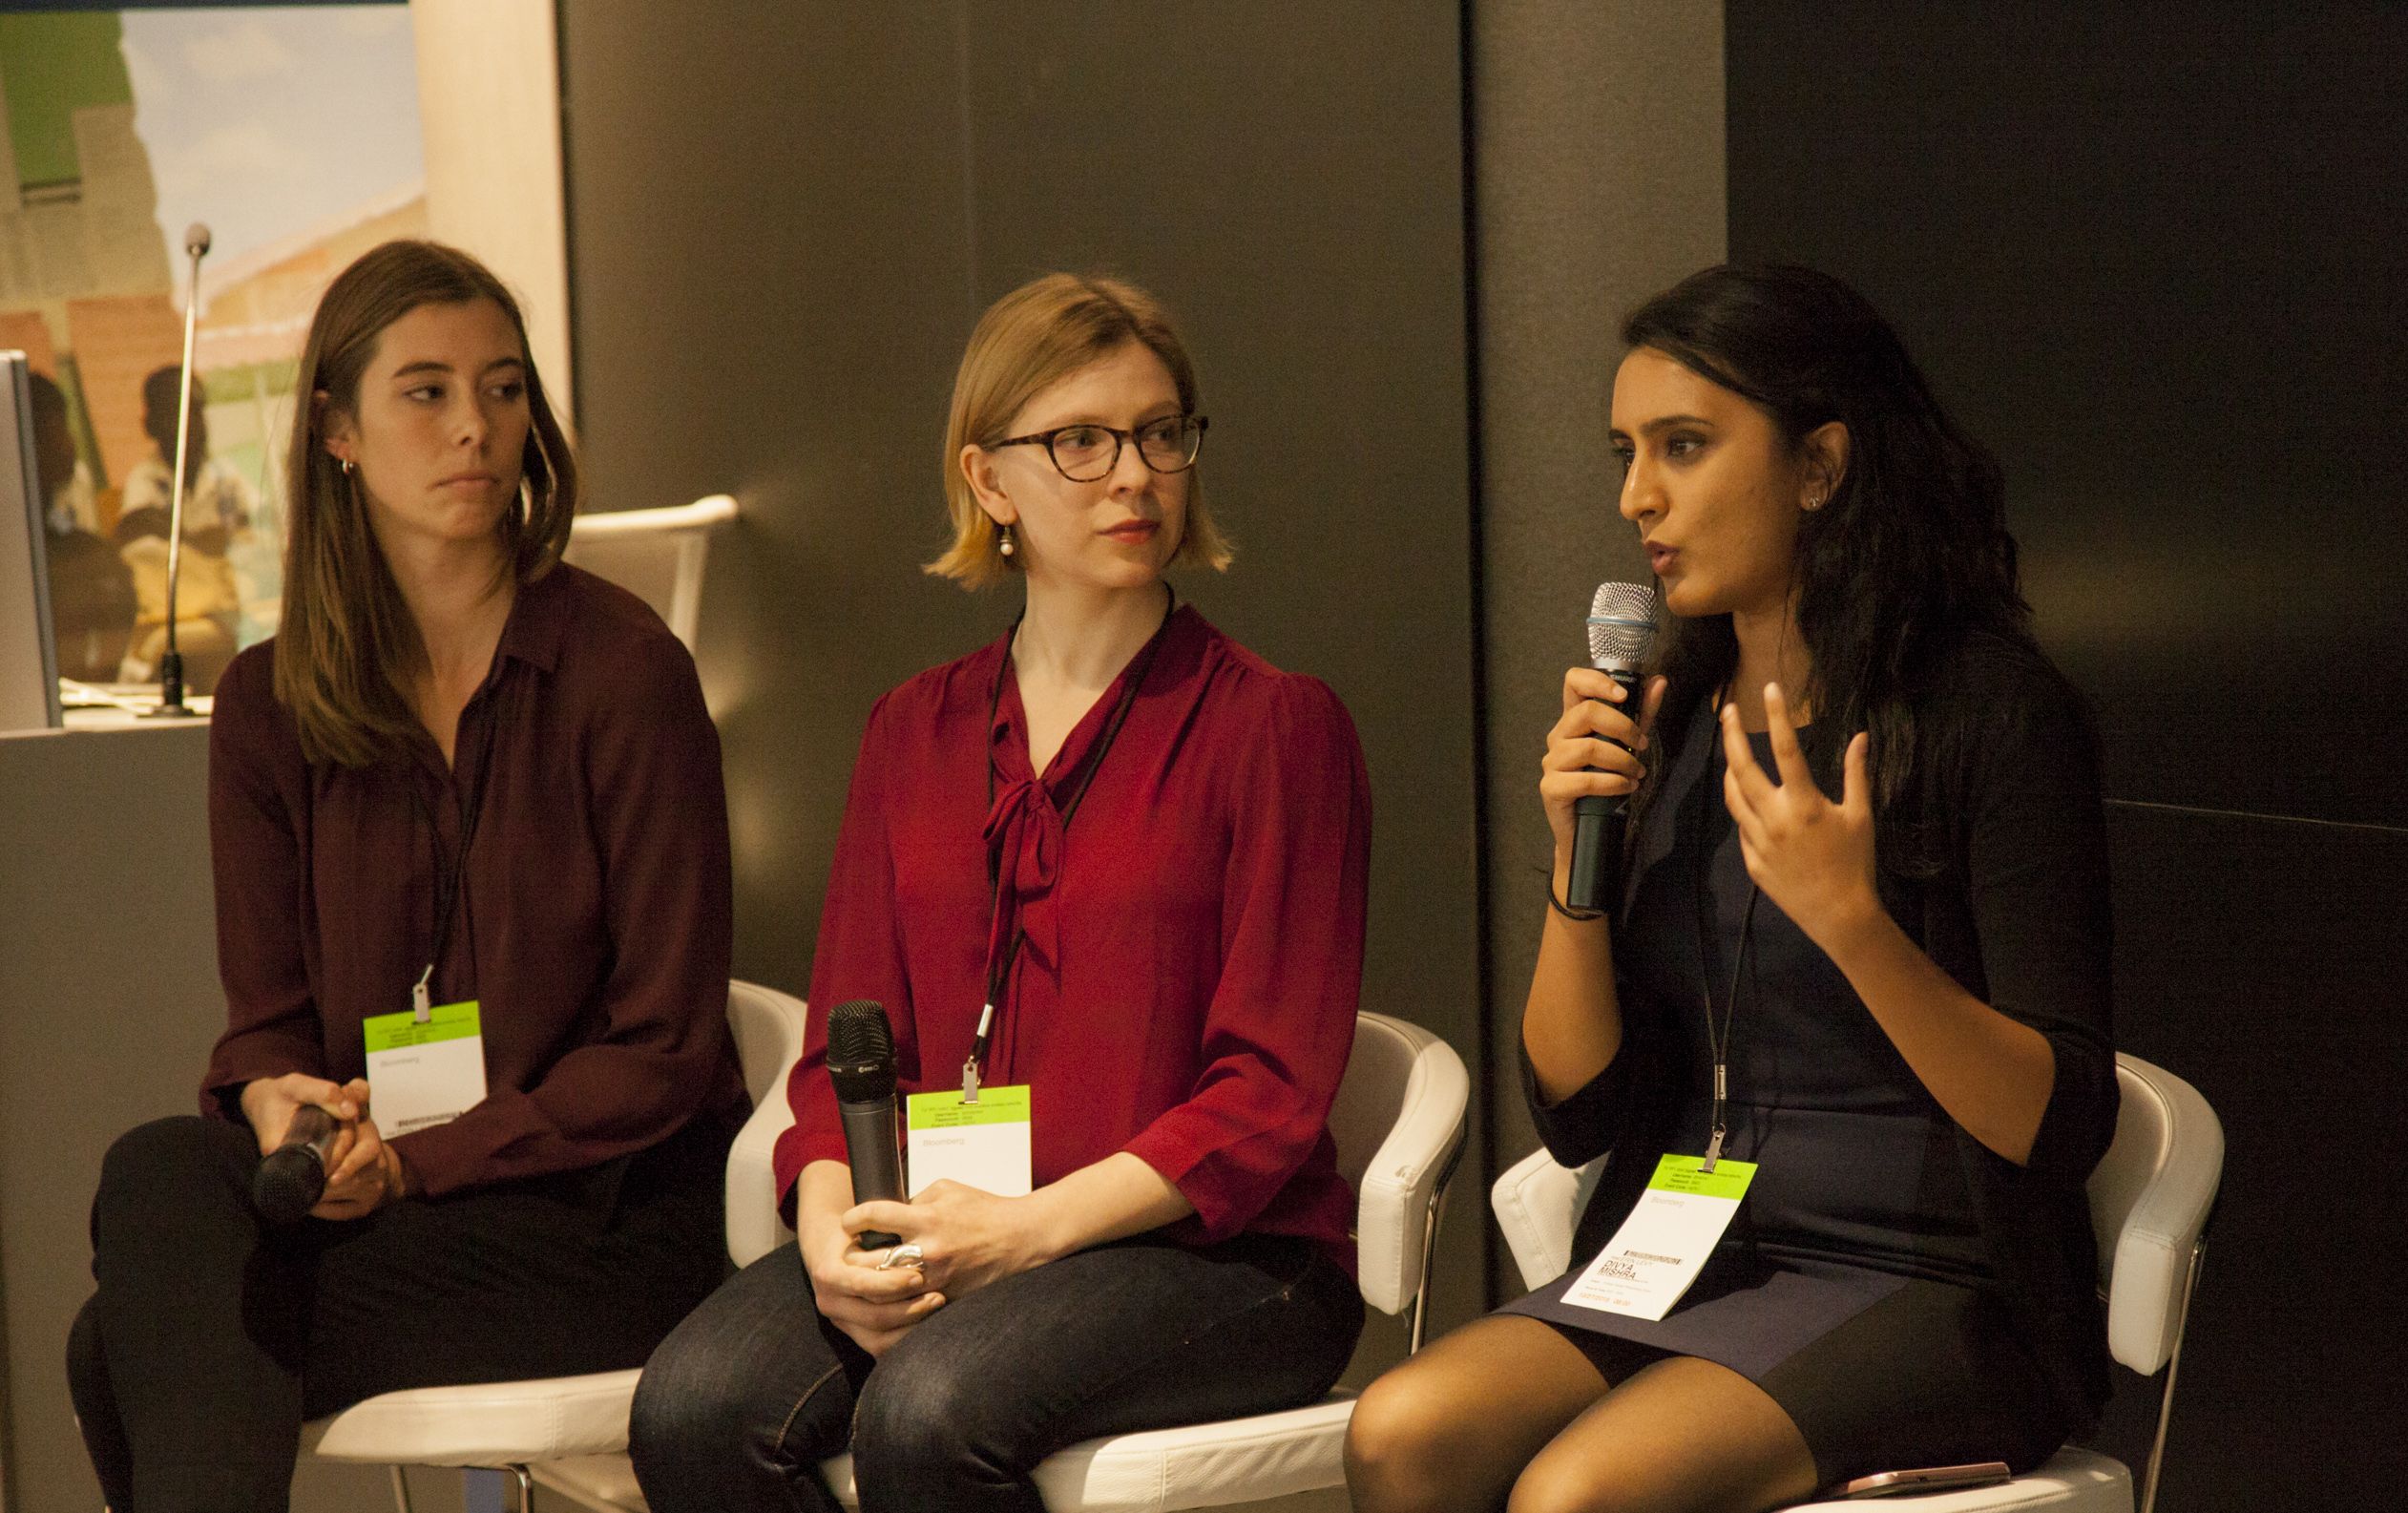 Student Fellow team, Thea Piltzecker and Liz Scherffius (Columbia University Graduate School of Journalism) listening to Divya Mishra (Johns Hopkins Bloomberg School of Public Health) during the Q&A for The Refugee Experience Panel at 2018 Washington Weekend. Image by Jin Ding. United States, 2018.